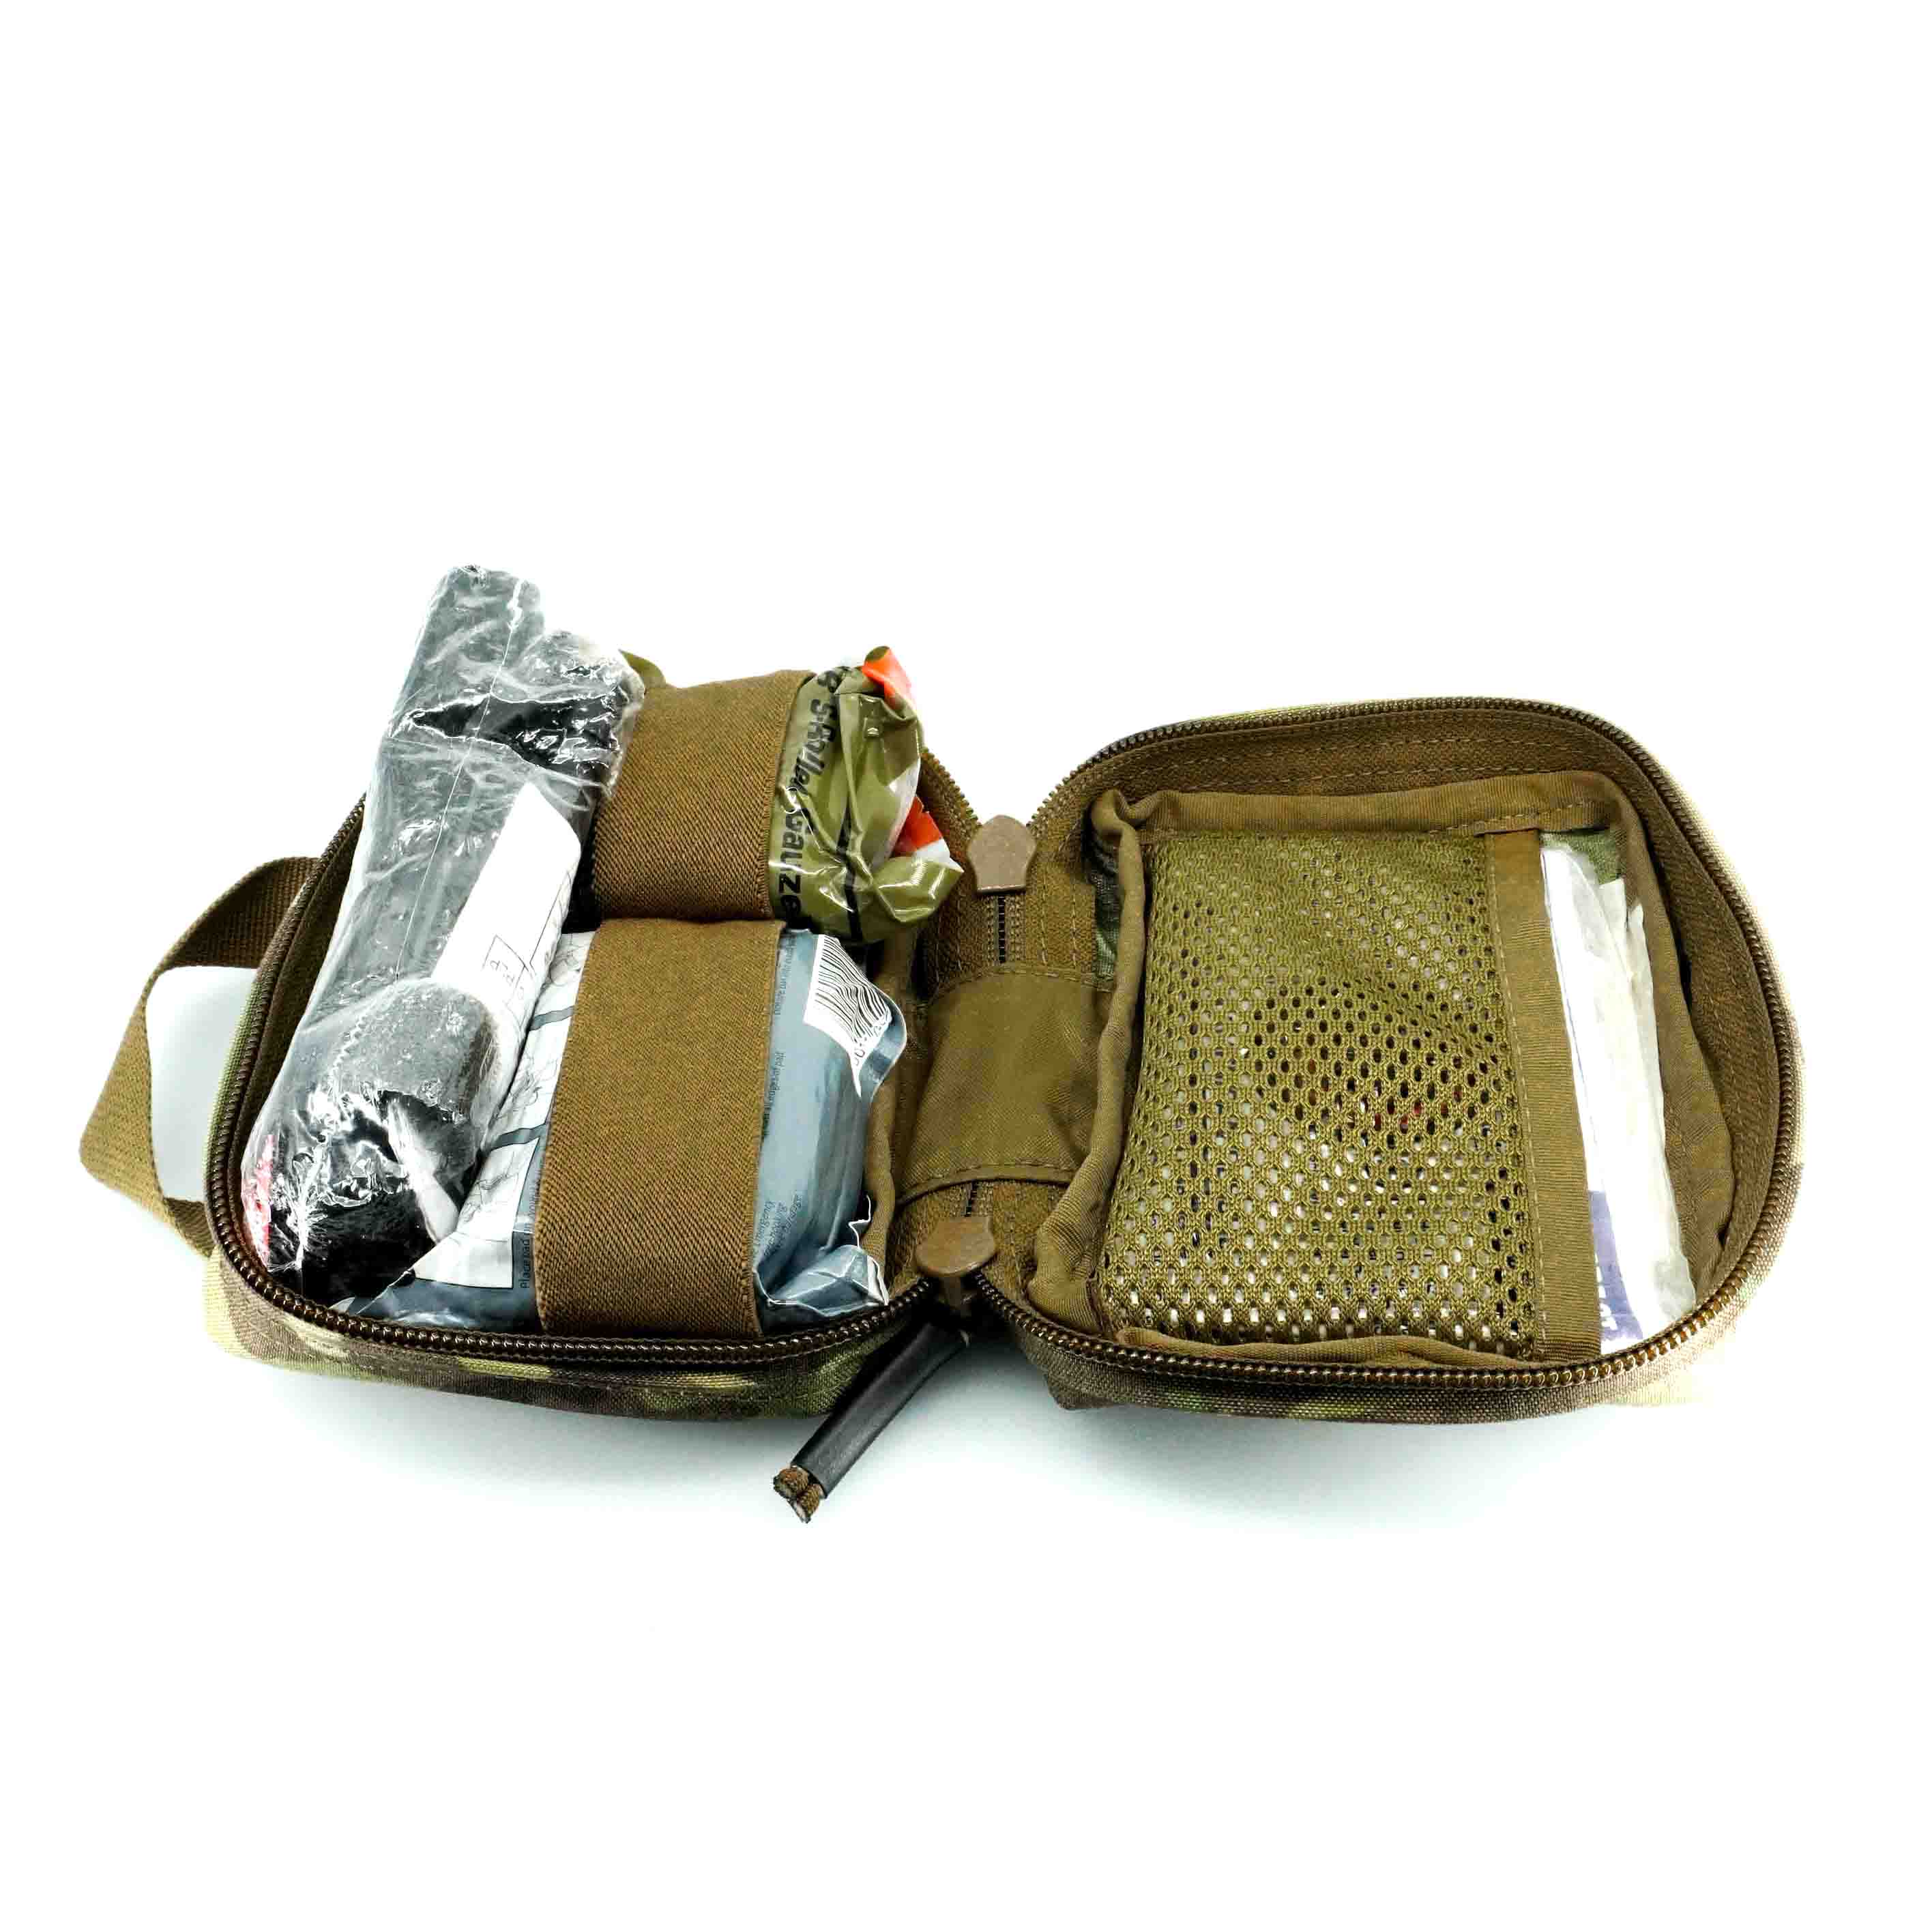 IFAK Medical Pouch with QD Holder